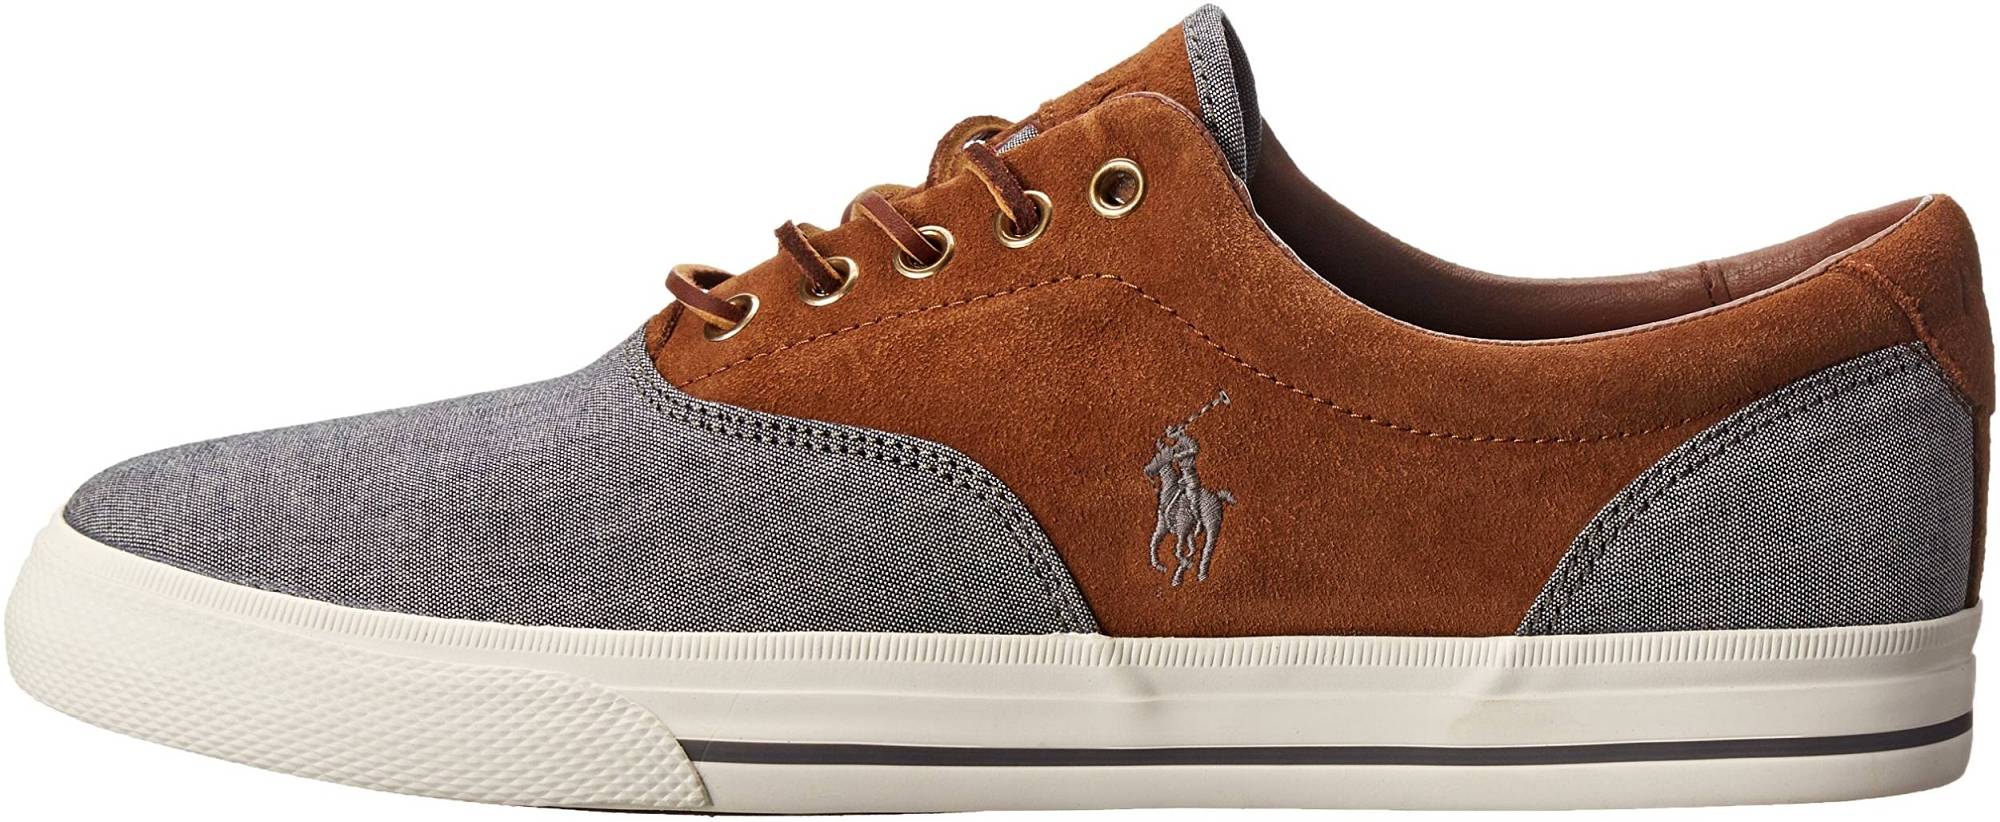 Polo Ralph Lauren Vaughn Saddle – Shoes Reviews & Reasons To Buy